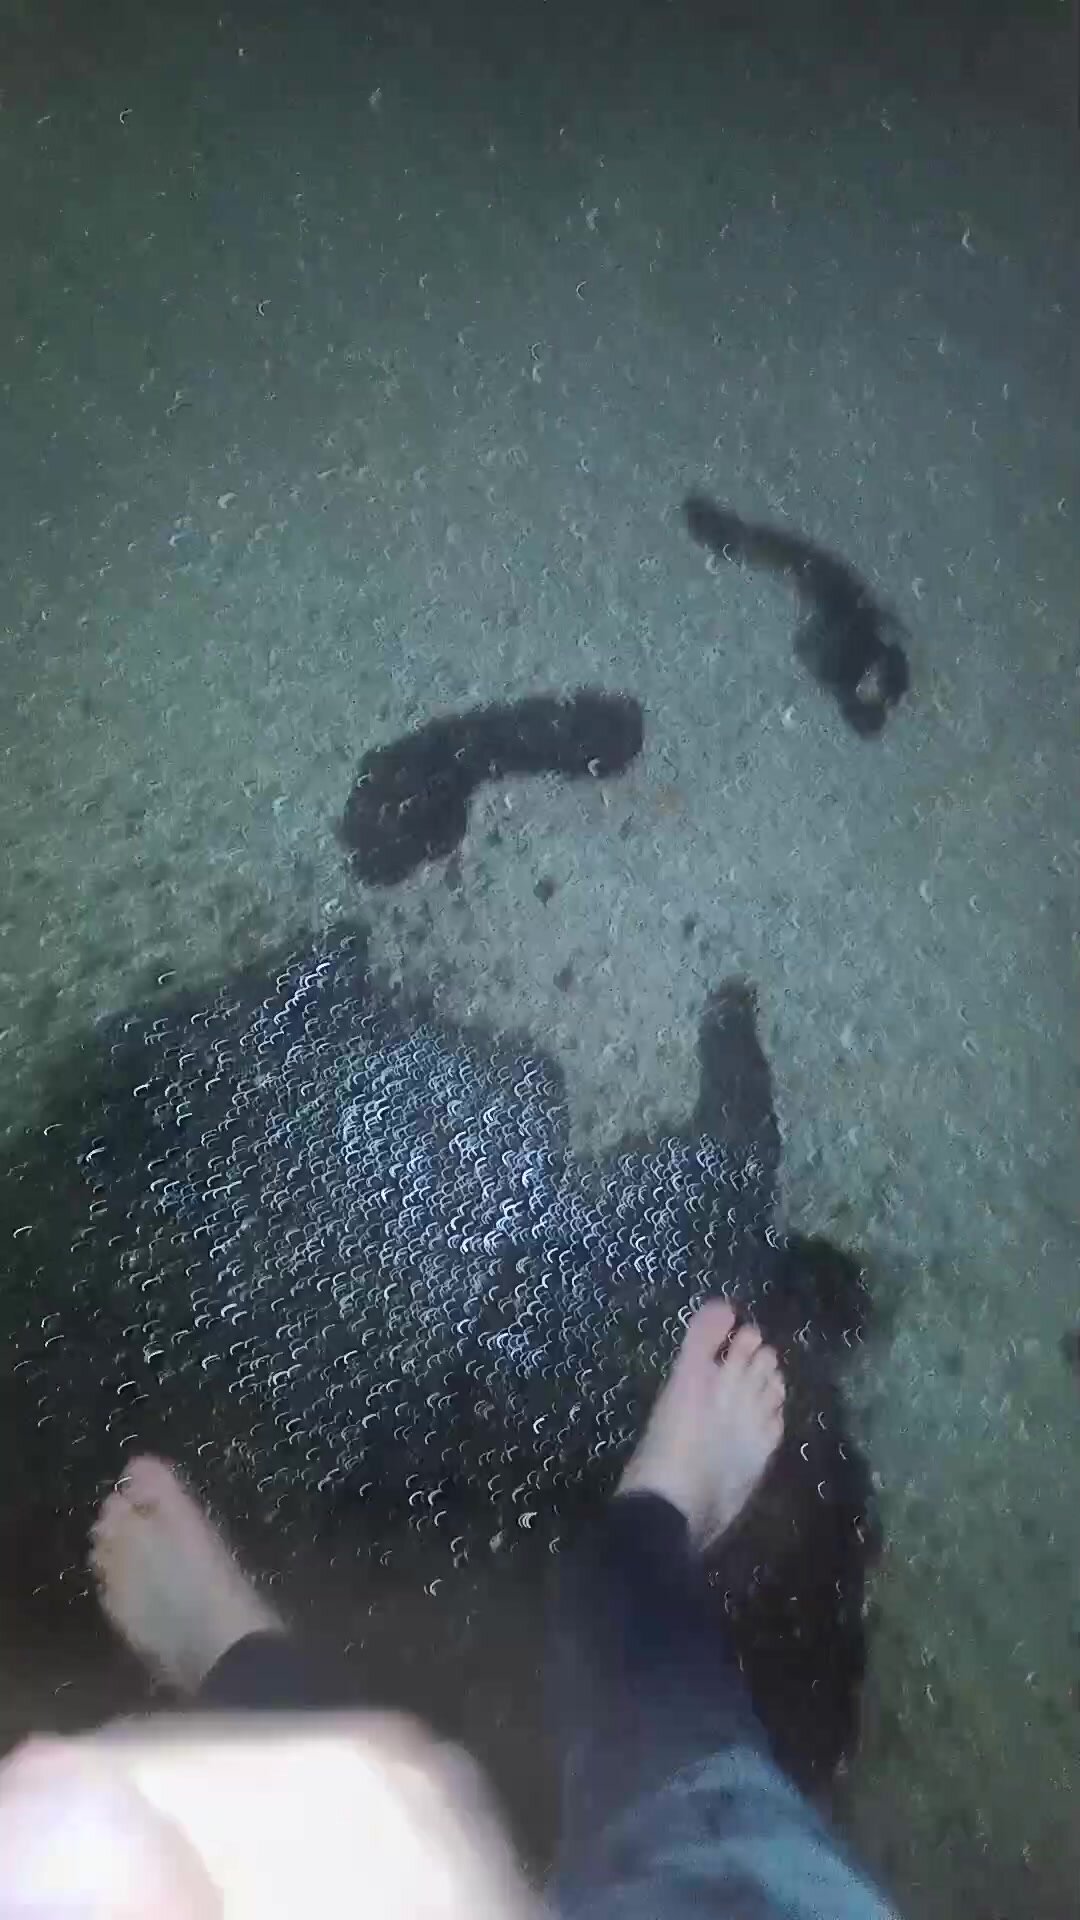 Twink barefoot in piss puddle